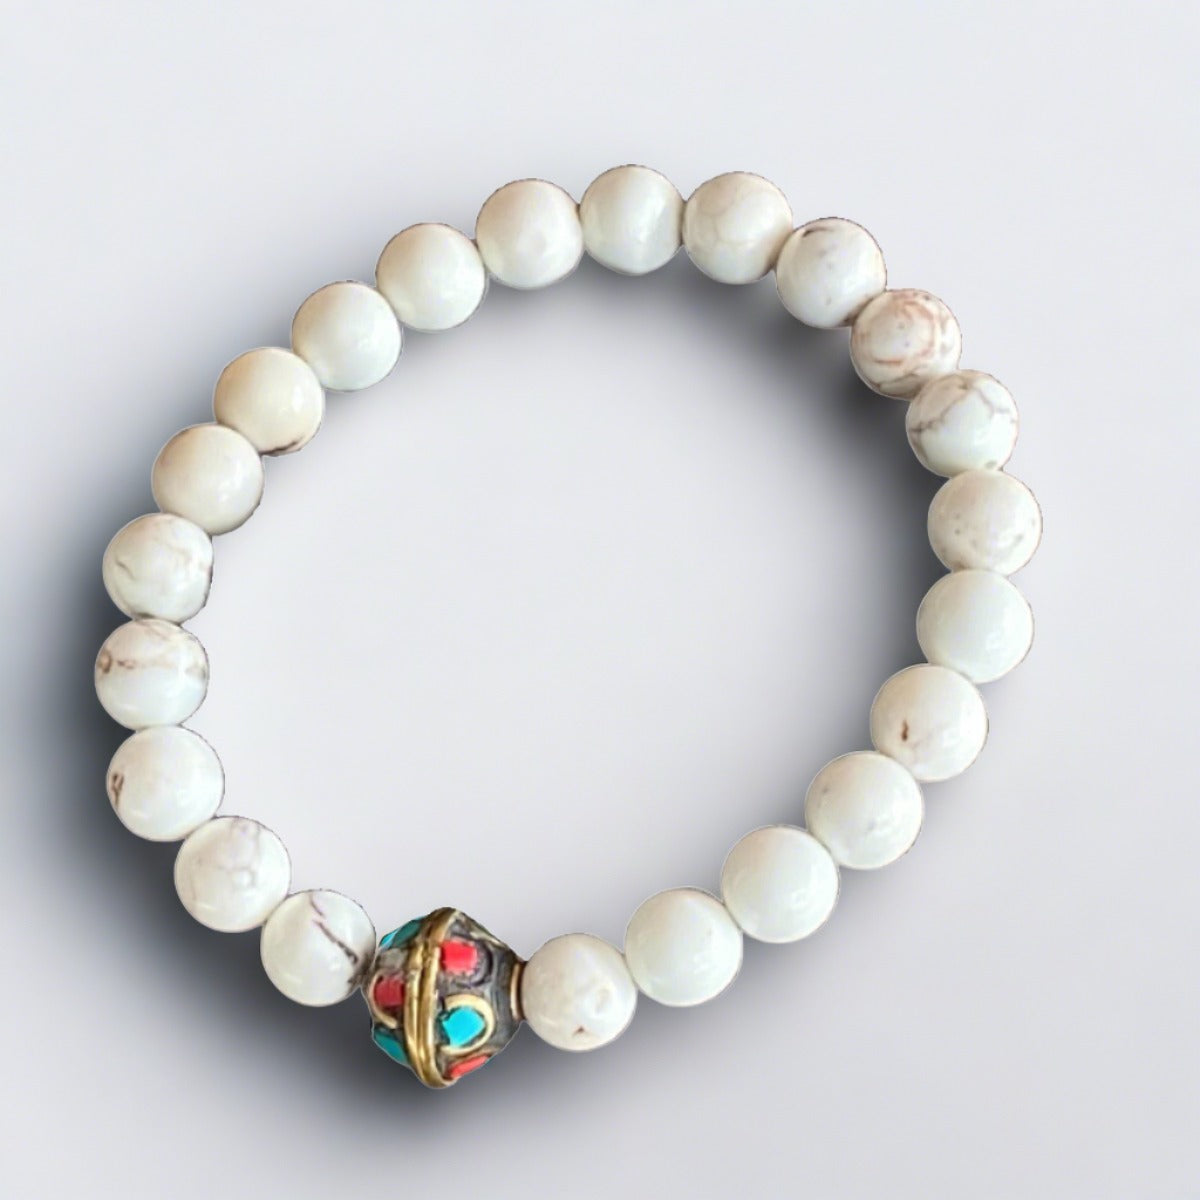 White magnesite 8 mm gemstone mala bracelet with Tibetan coral and turquoise cylindrical  bead